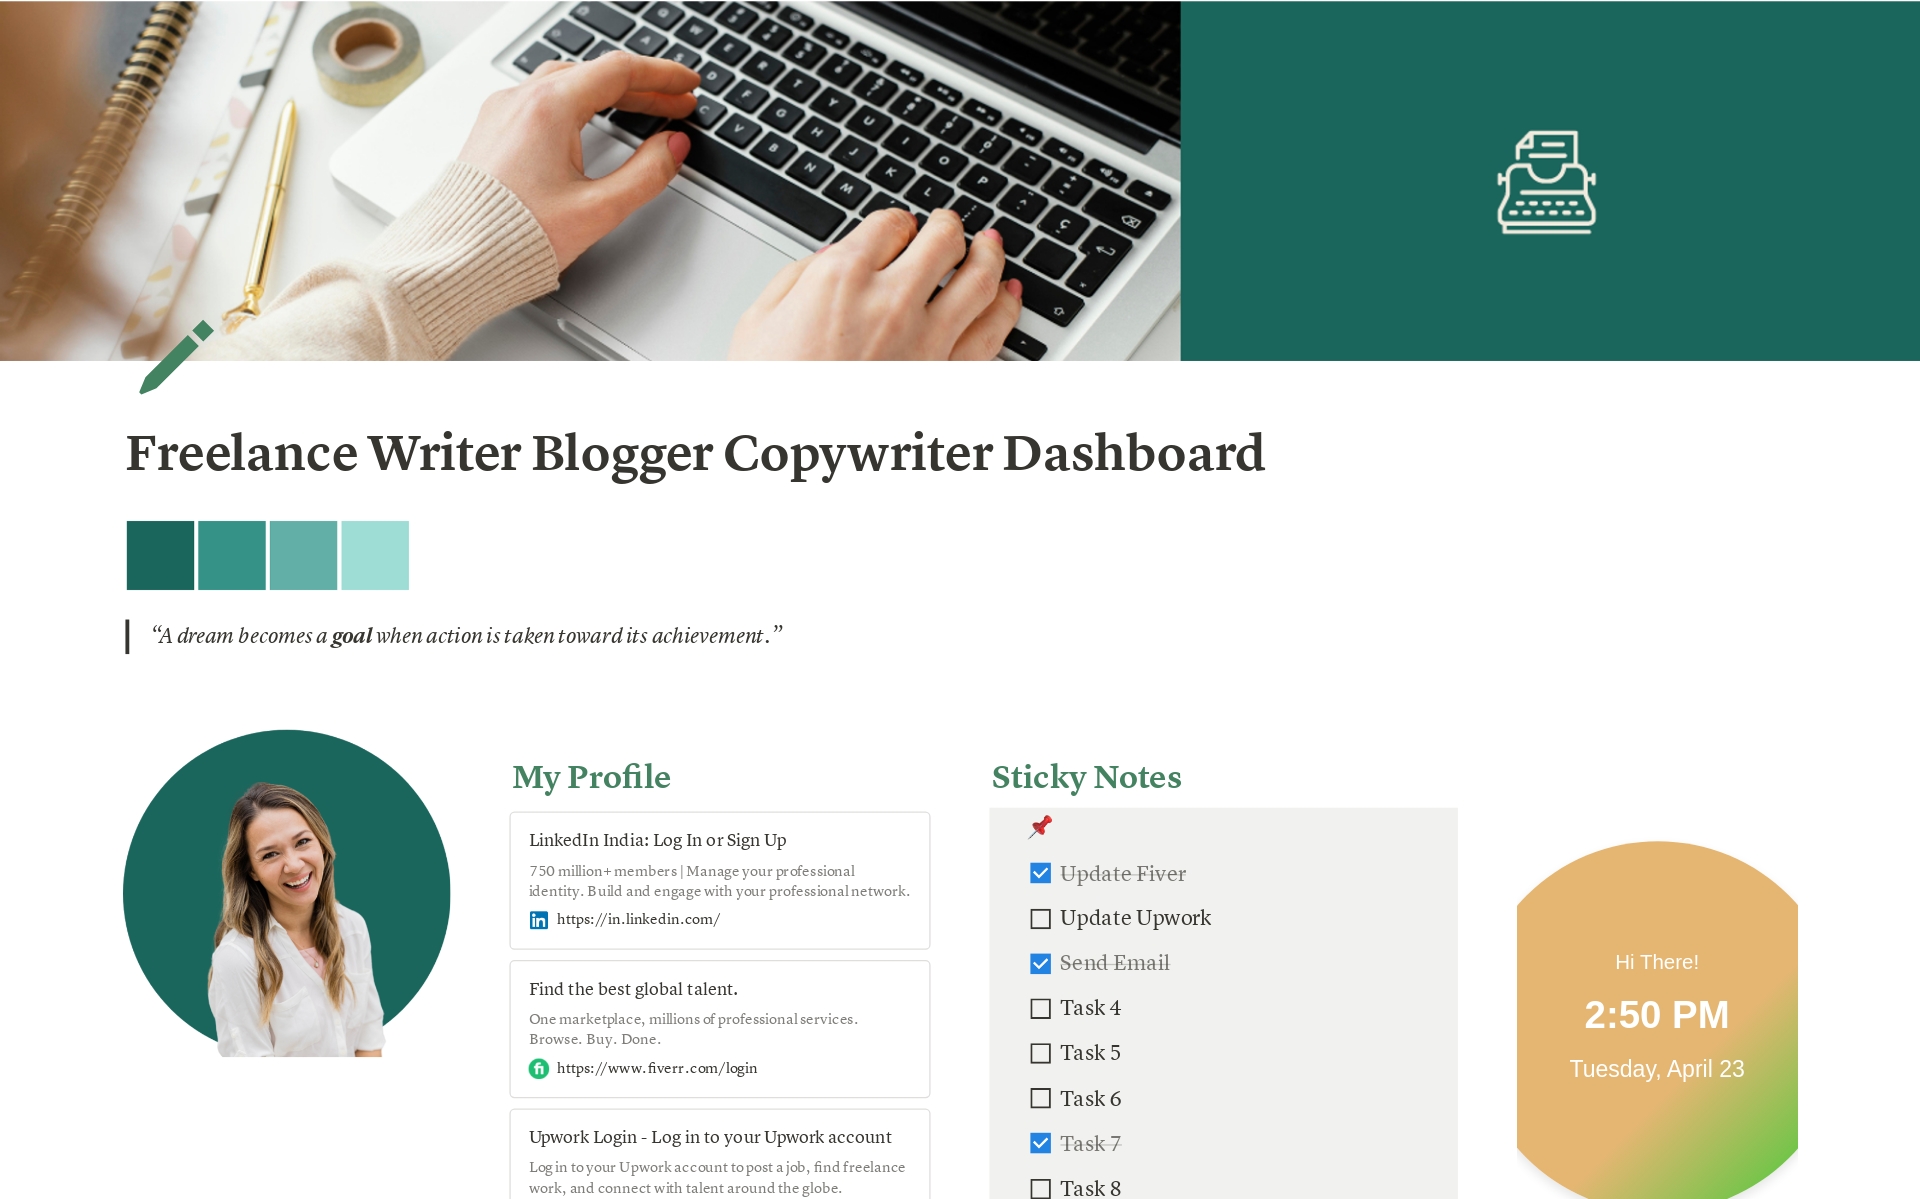 A straightforward workspace for content writers, copywriters and bloggers!

Who is this for?
- You are an online writer and you love Notion
- You need an easy workflow to manage your writing projects
- You want room for customization